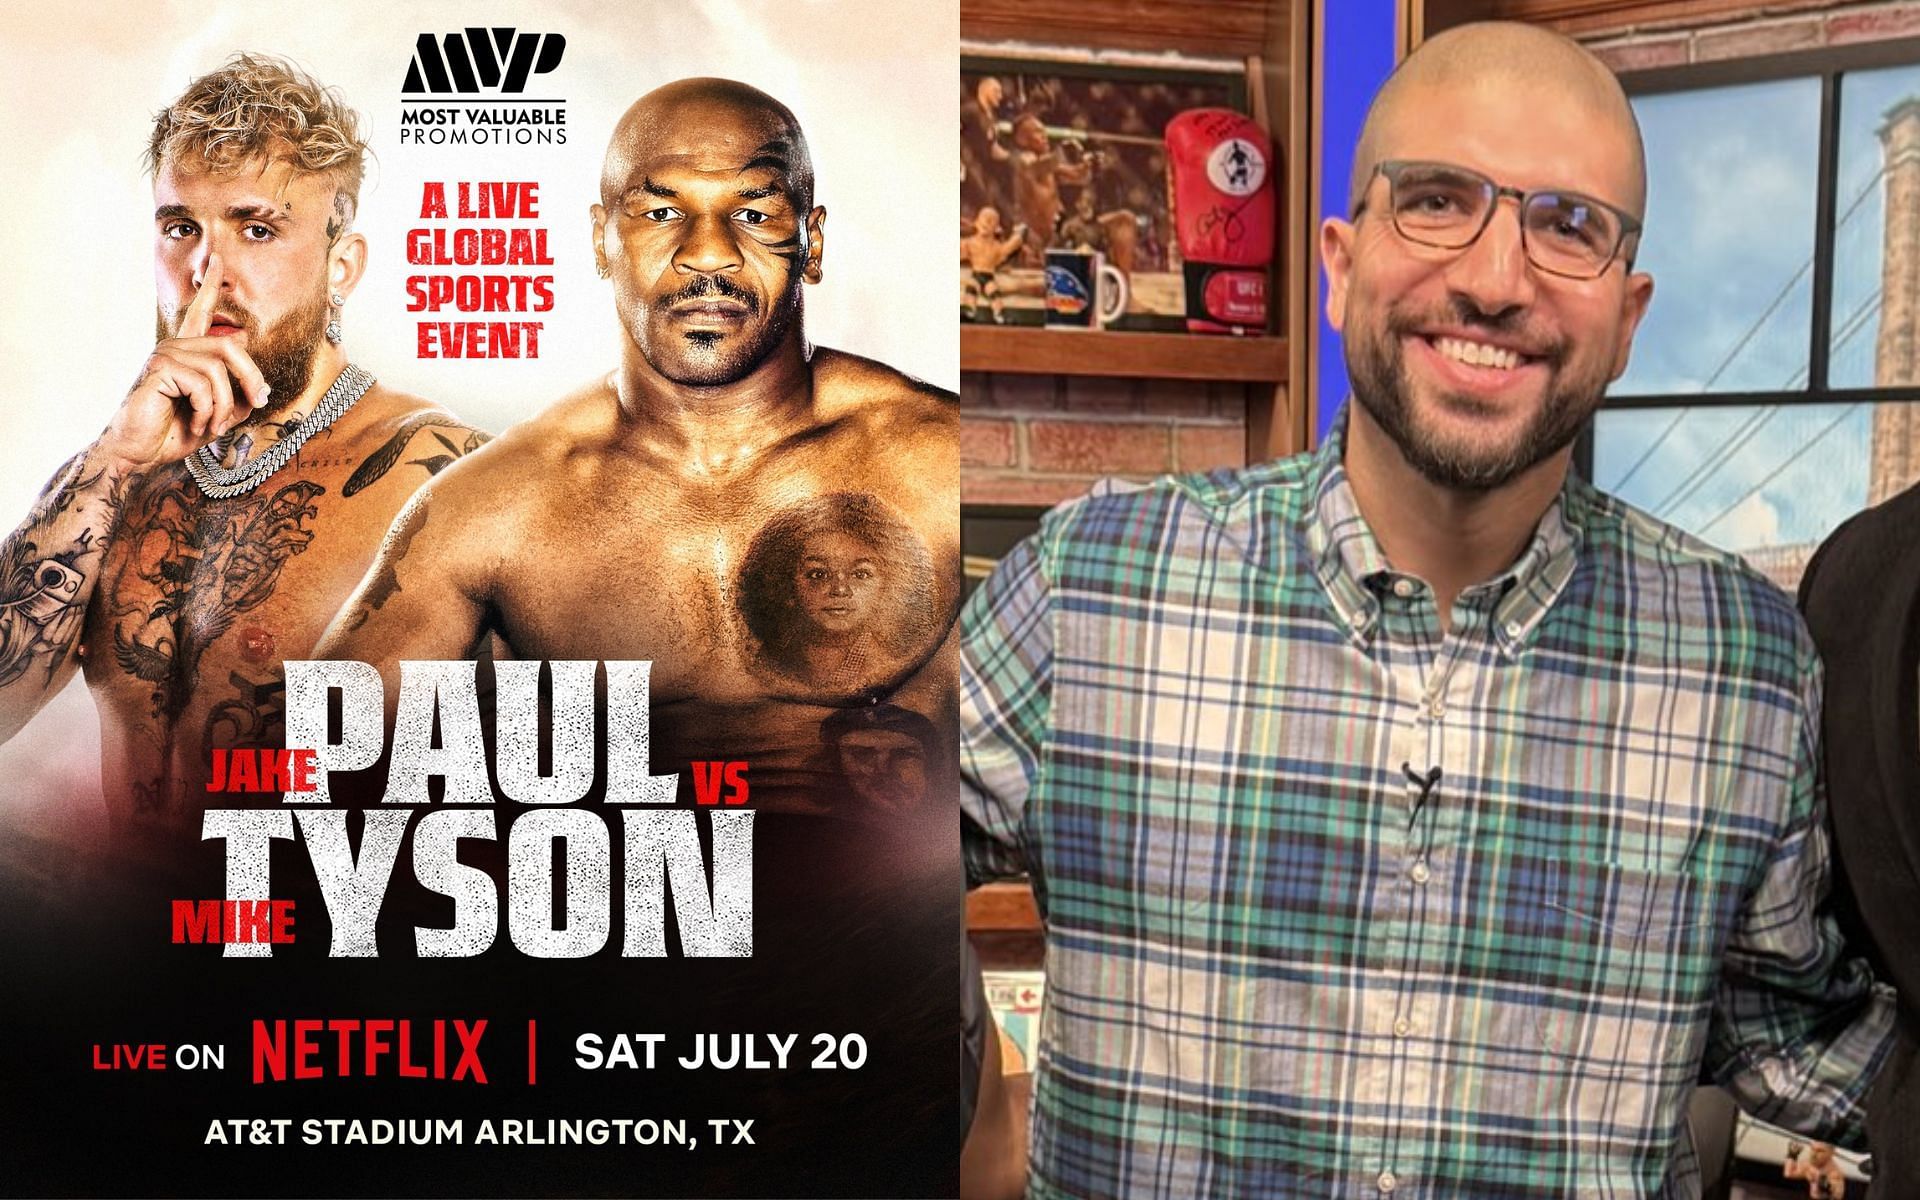 Ariel Helwani discloses what Jake Paul vs. Mike Tyson&rsquo;s boxing match will look like, per alleged insider conversations [Image courtesy: @arielhelwani and @MostVPromotions - X]